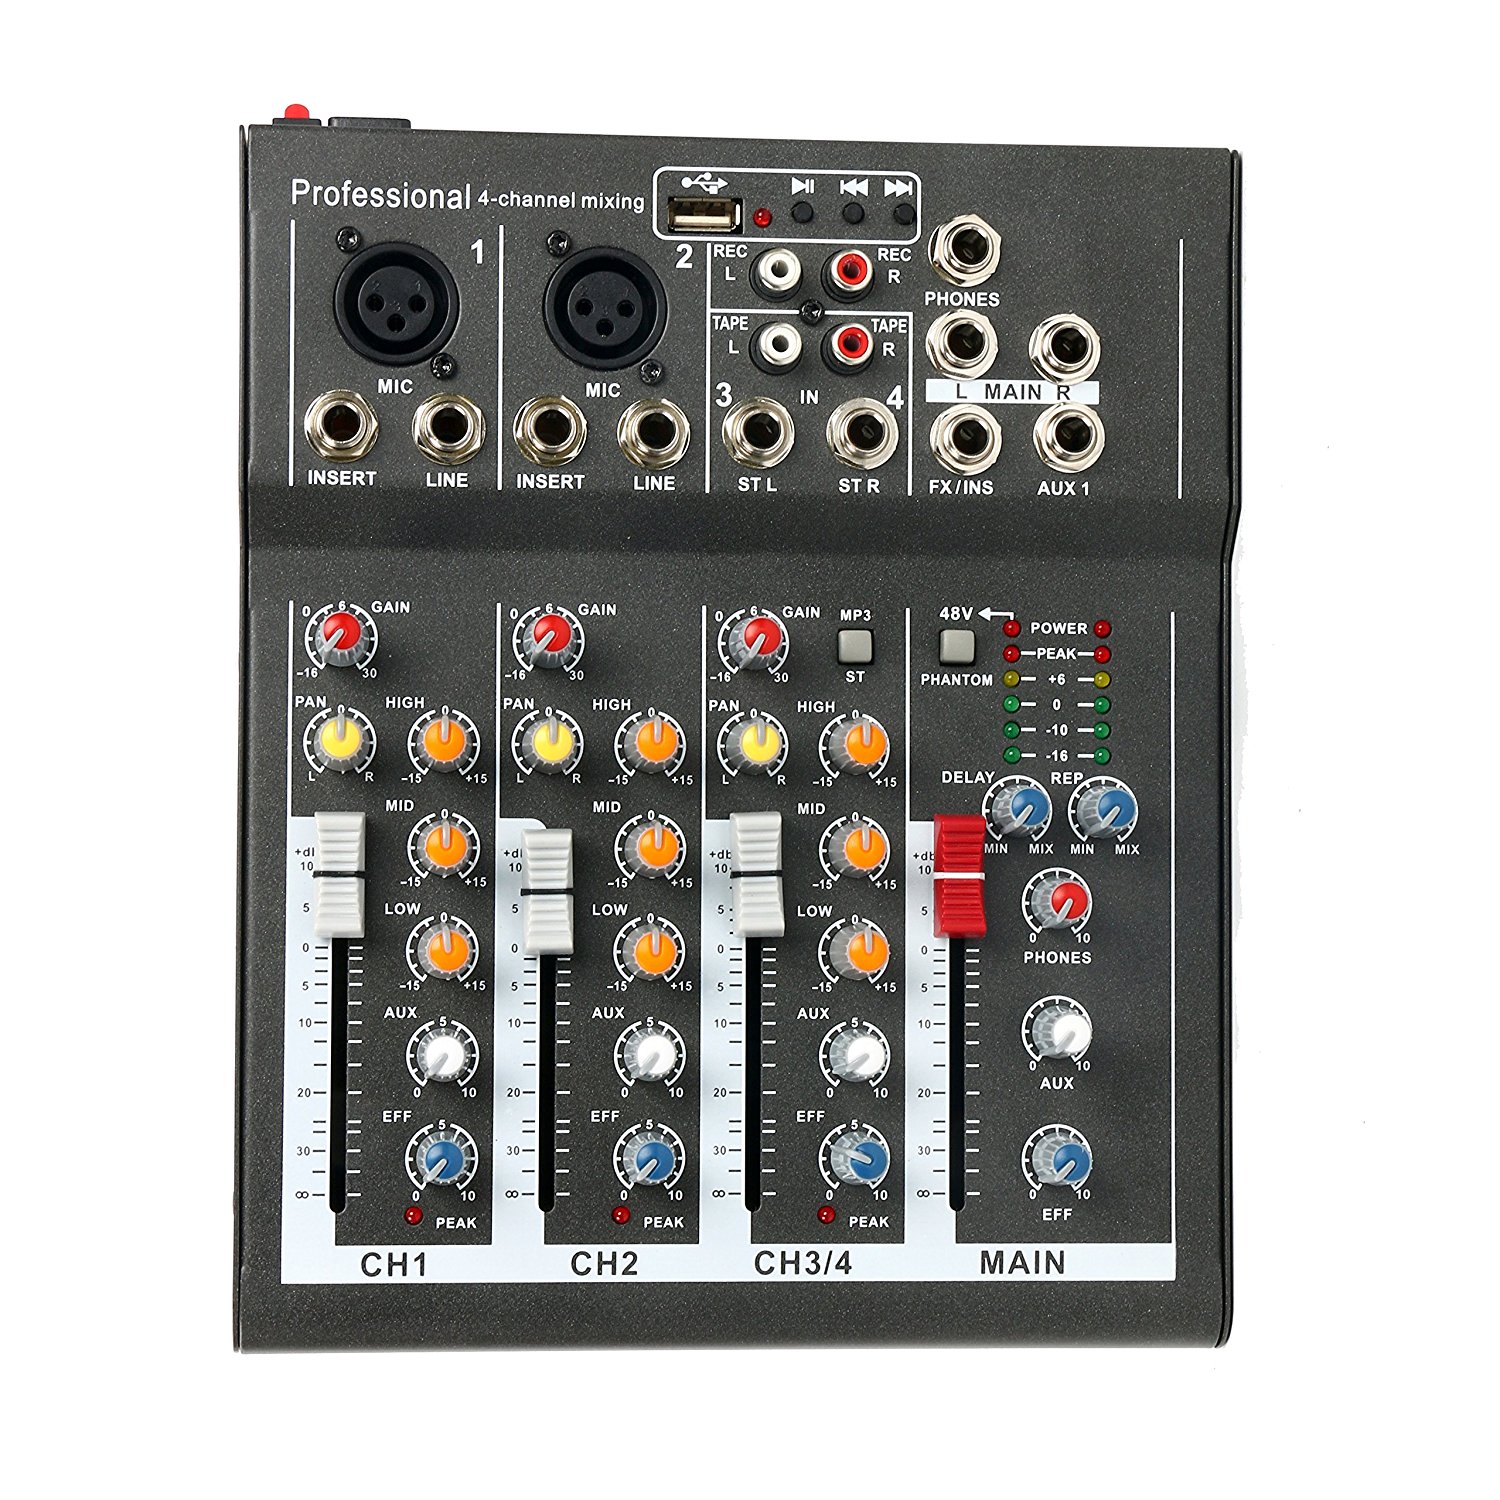 Newest Professional 4-Channel Live Studio Sound USB/MP3 Mixer Mixing ...